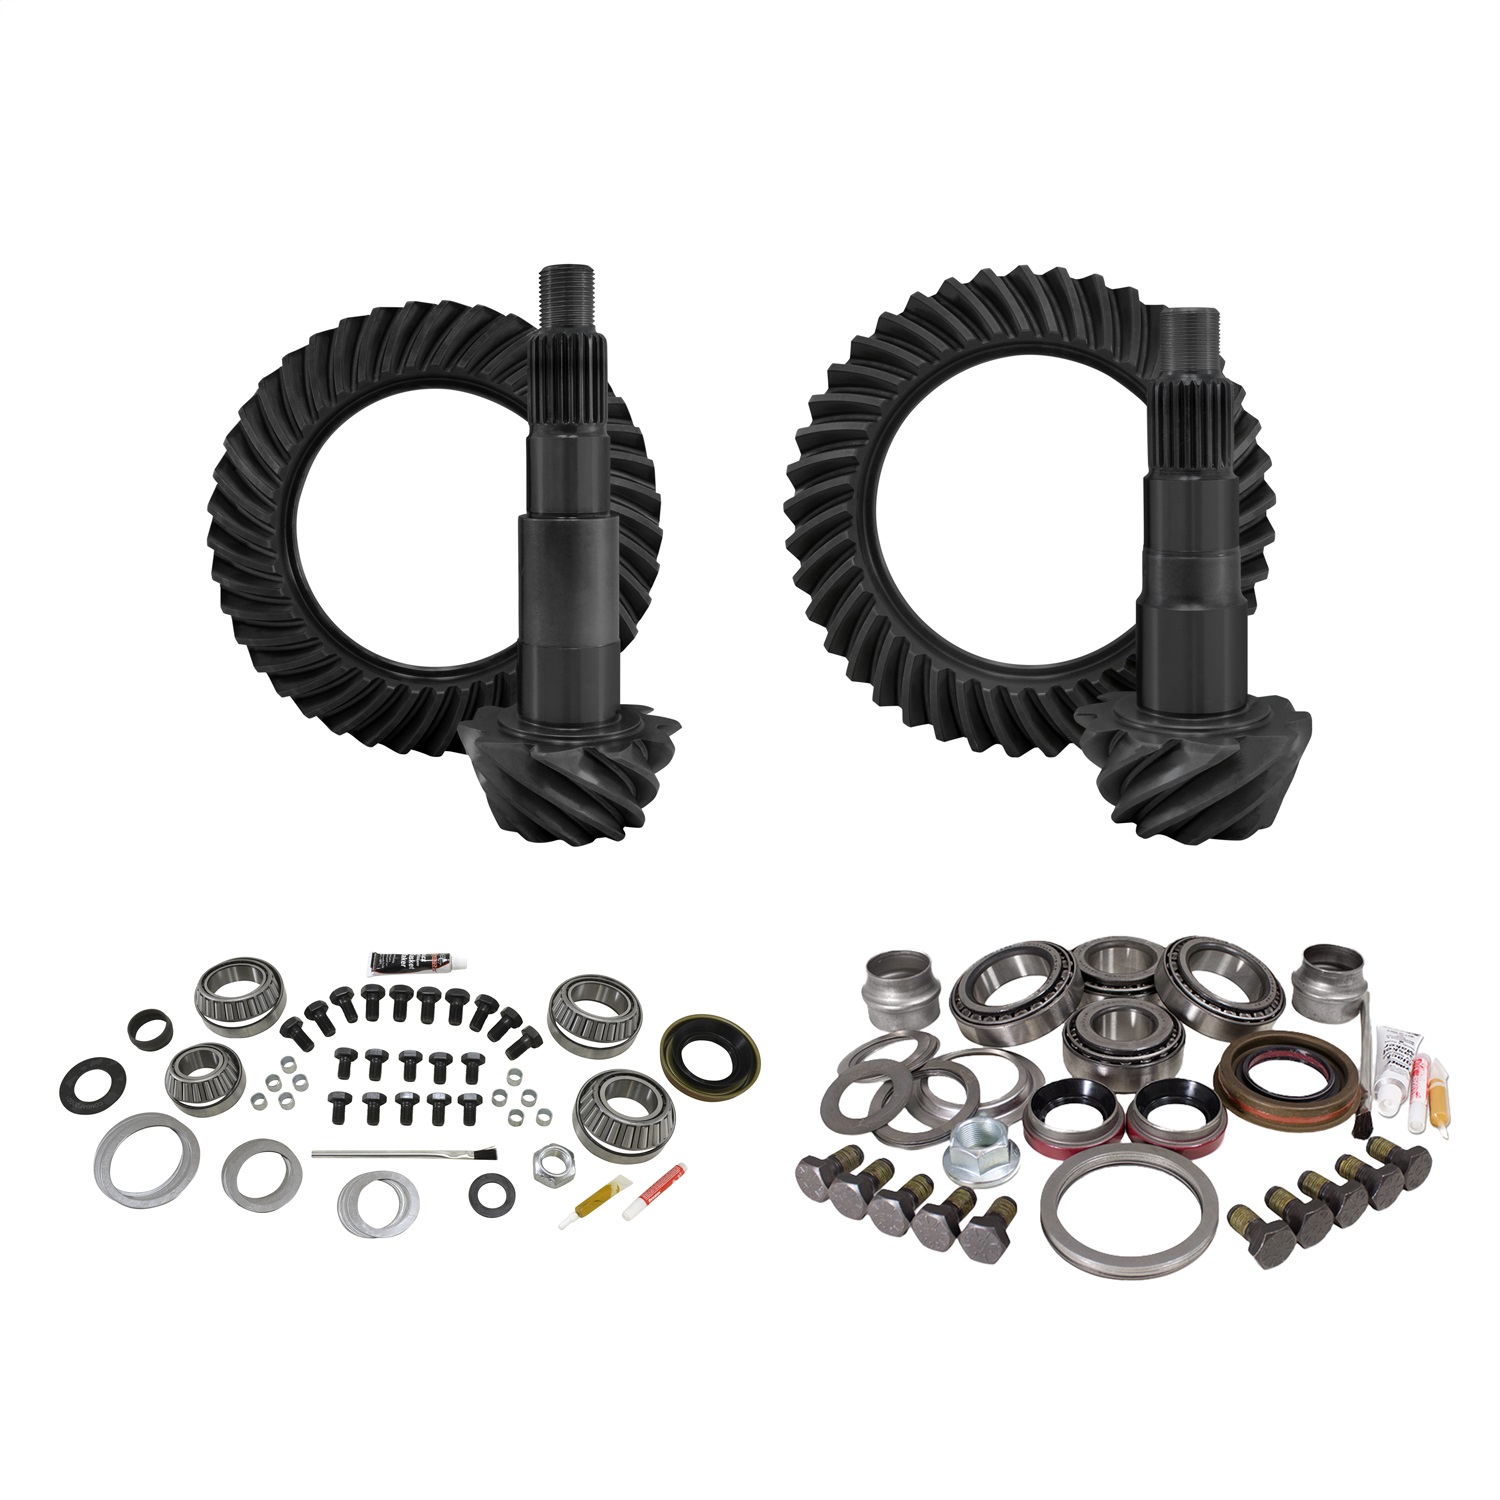 Yukon Gear & Axle YGK015 Ring And Pinion Gear And Install Kit Fits Wrangler (JK)